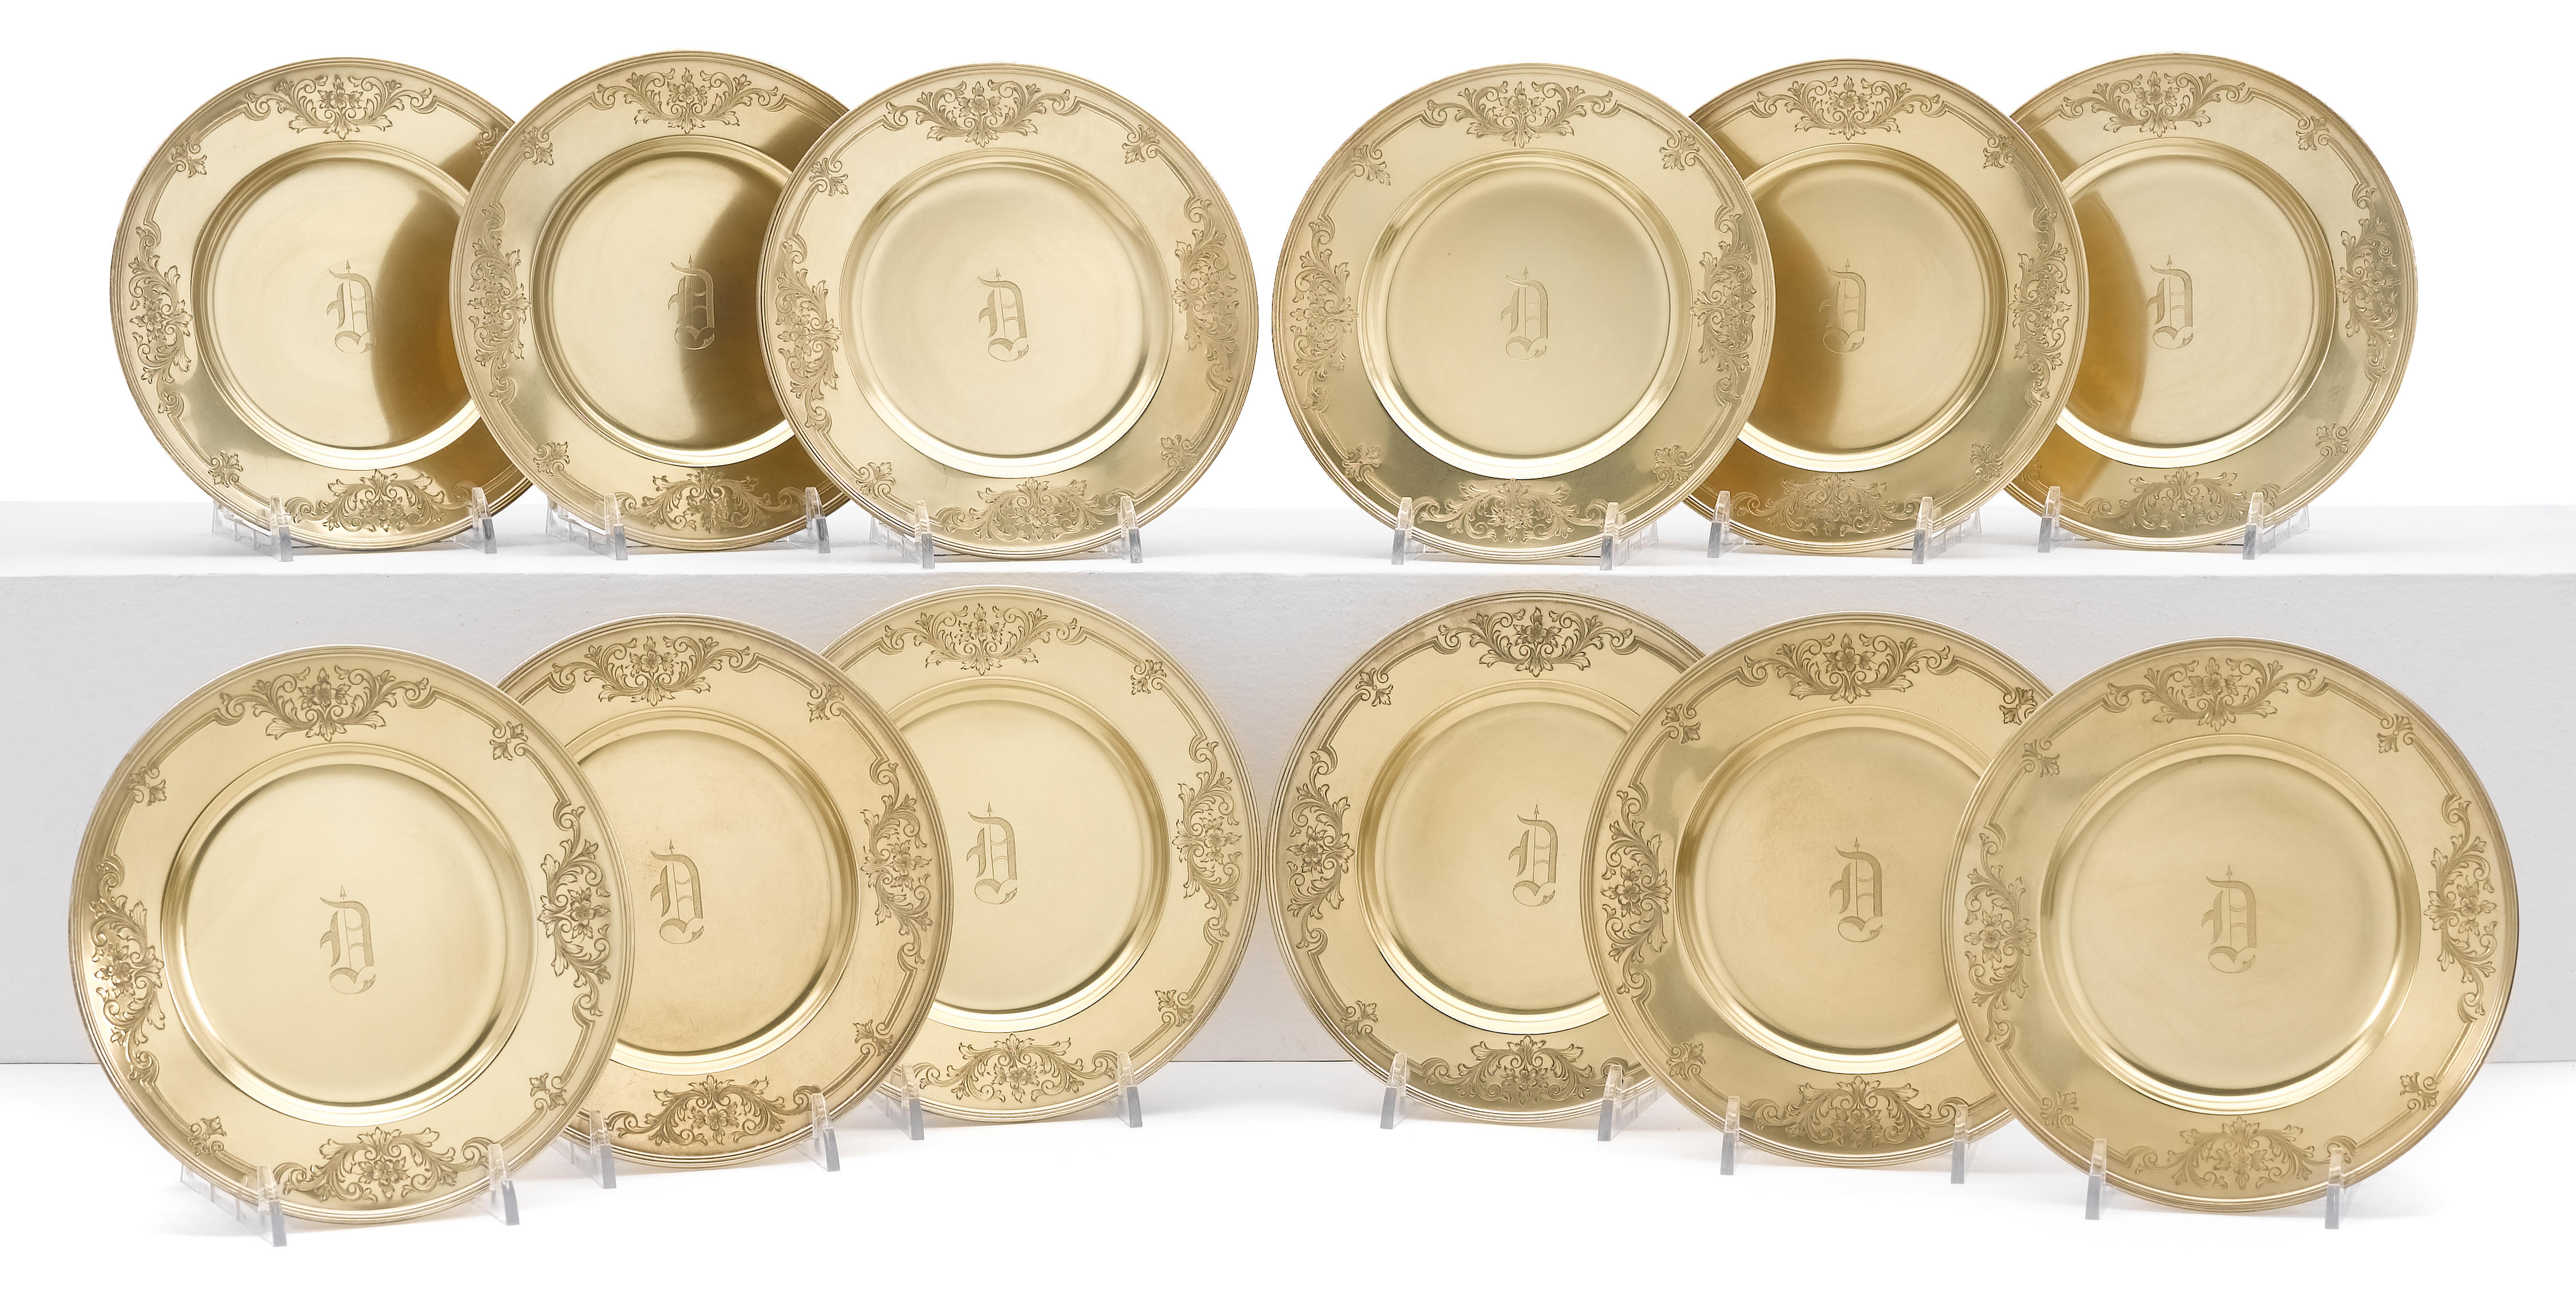 A sterling-gilt set of thirty six bread